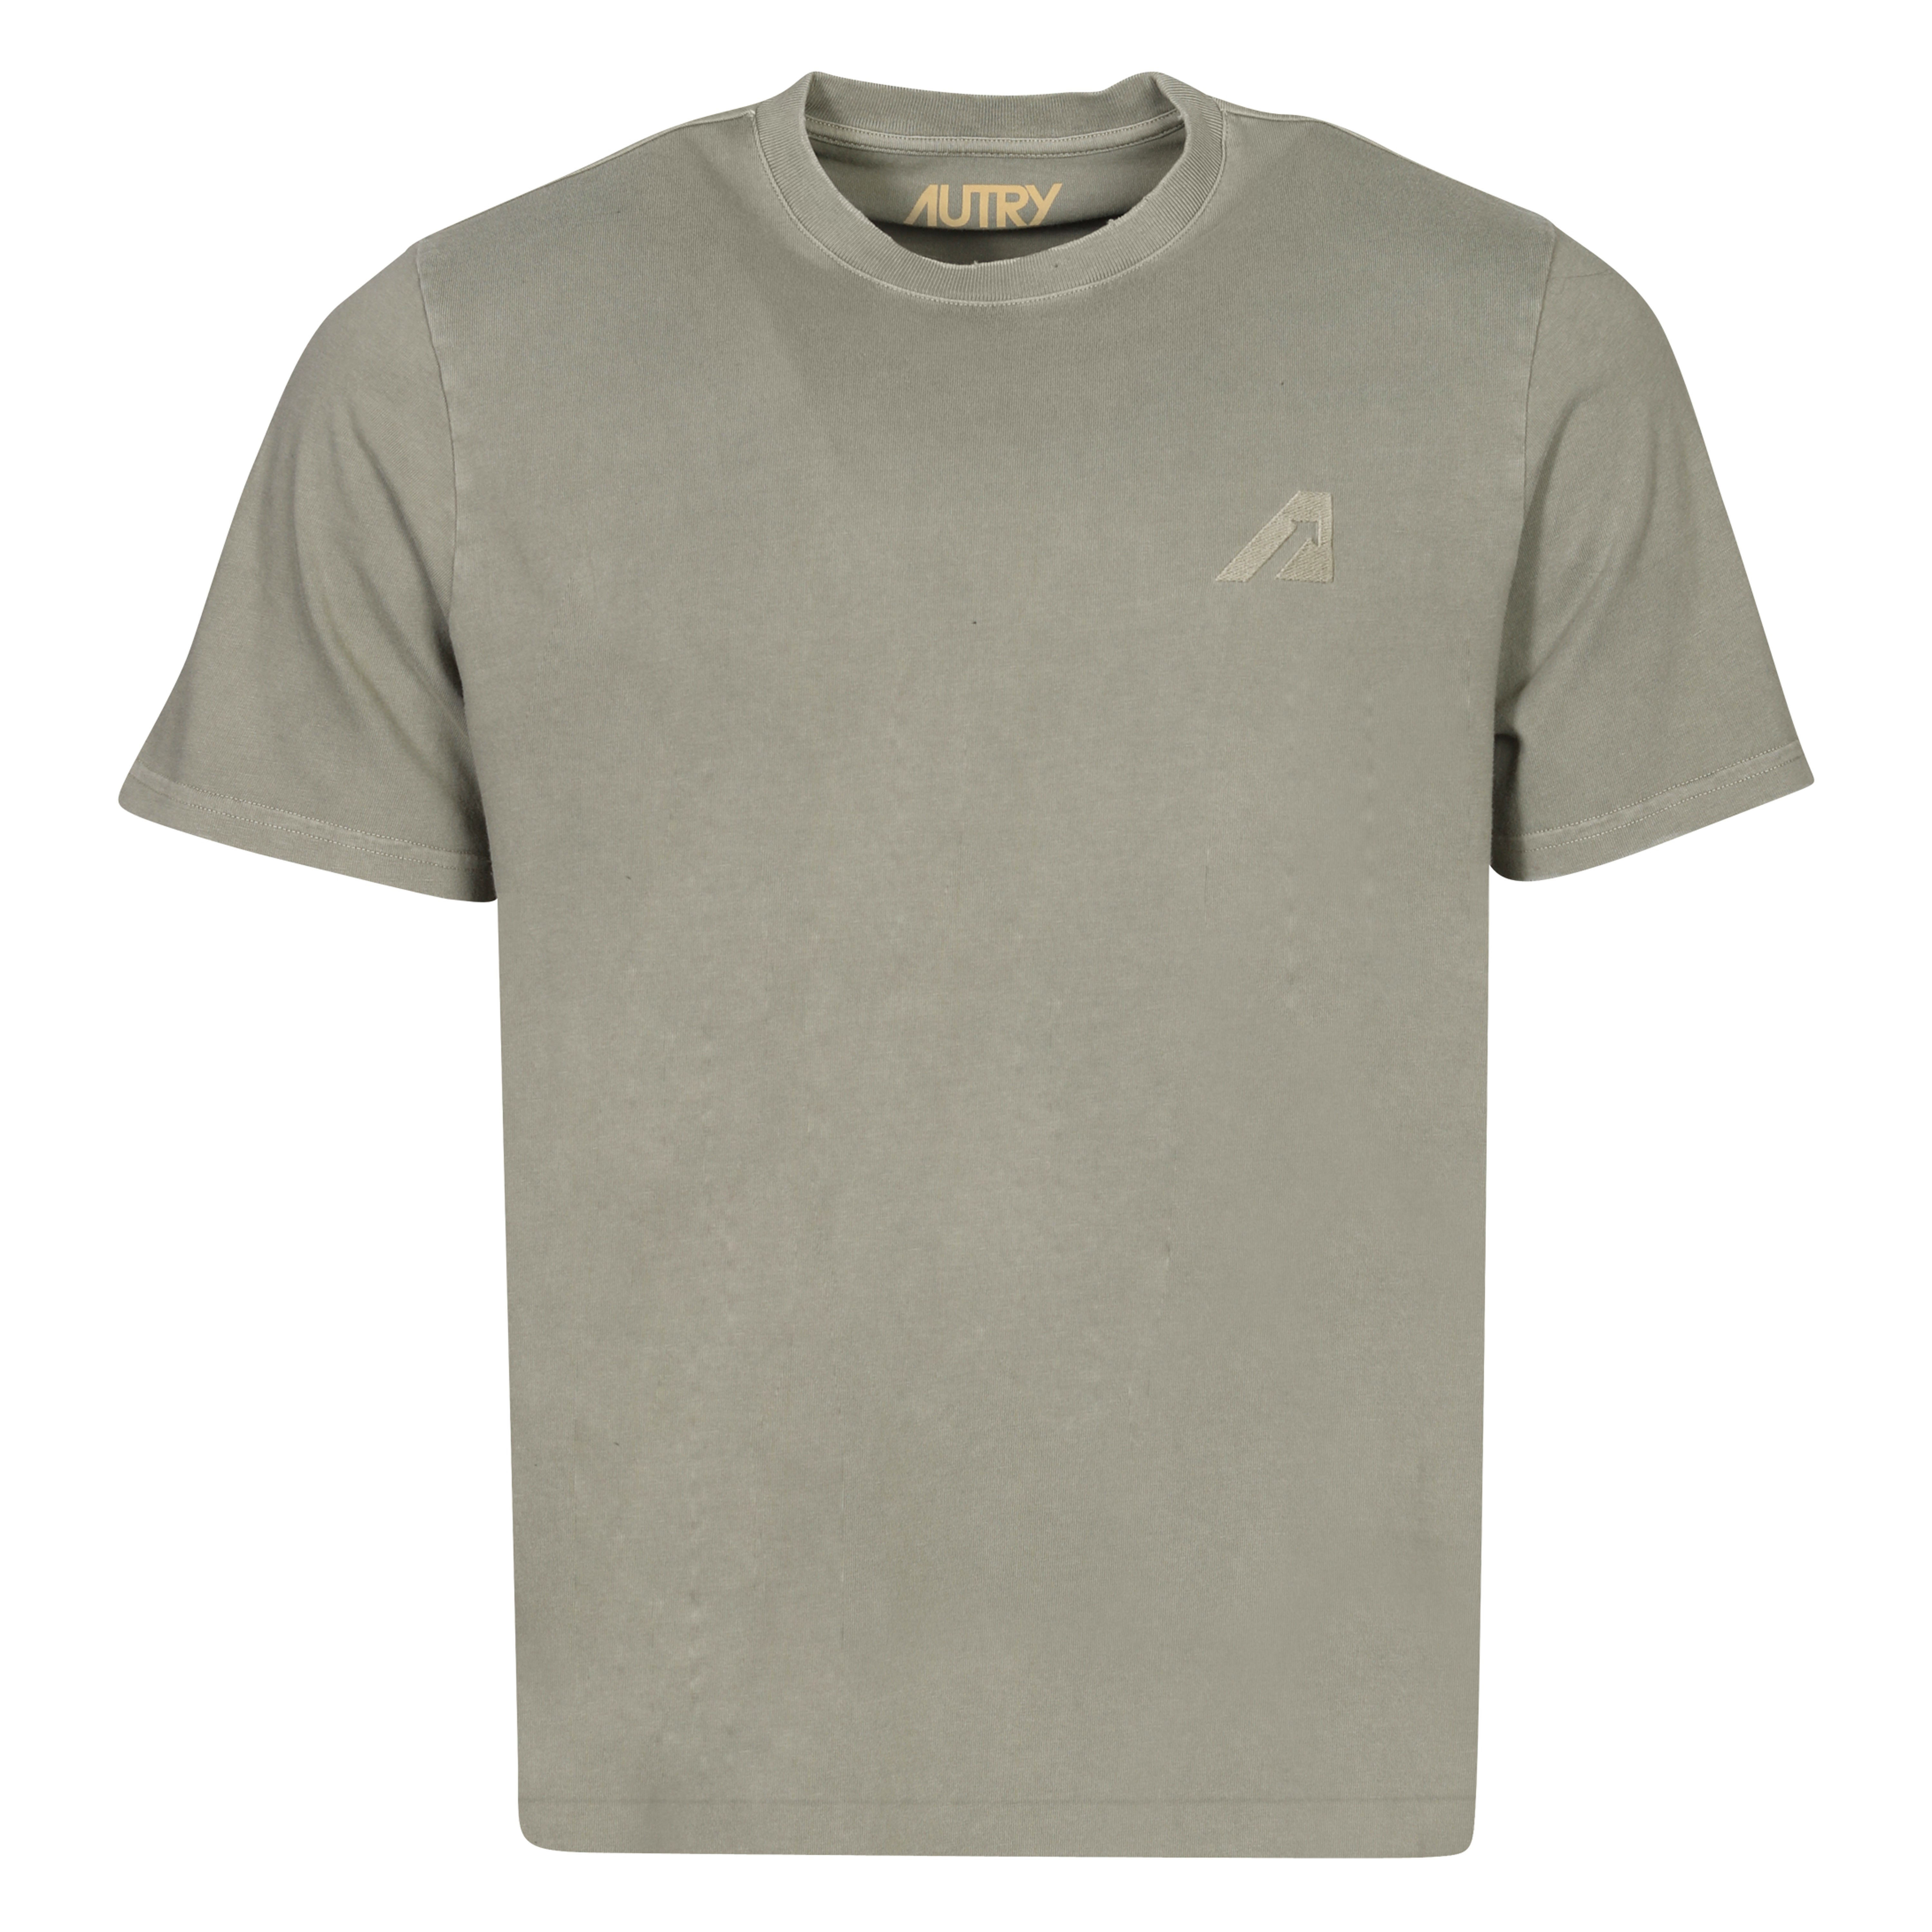 Autry Action Shoes Supervintage T-Shirt in Tinto Light Green